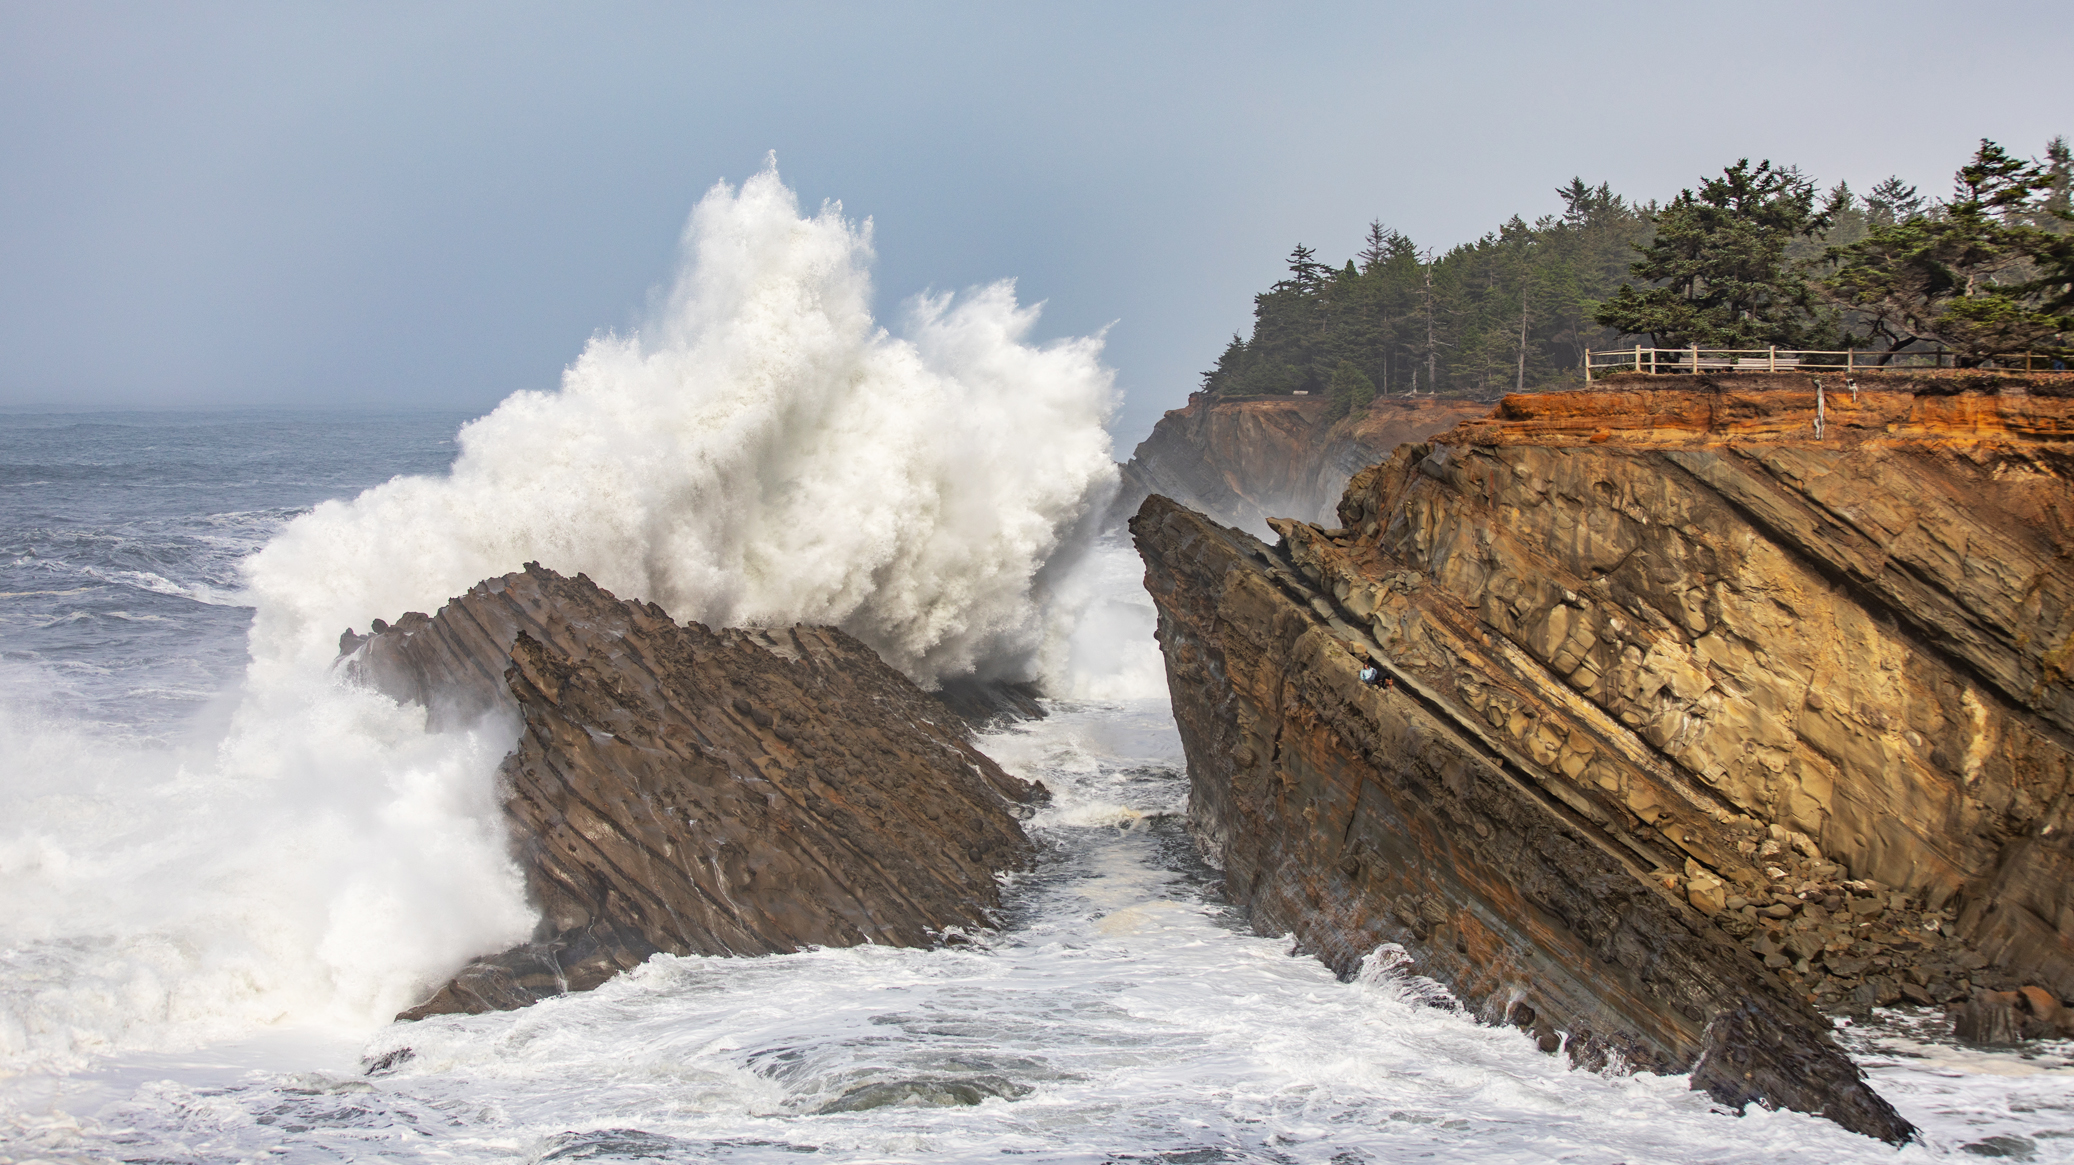 Winter Storms On Southern Oregon’s Coast Are Oregon’s Best Drama